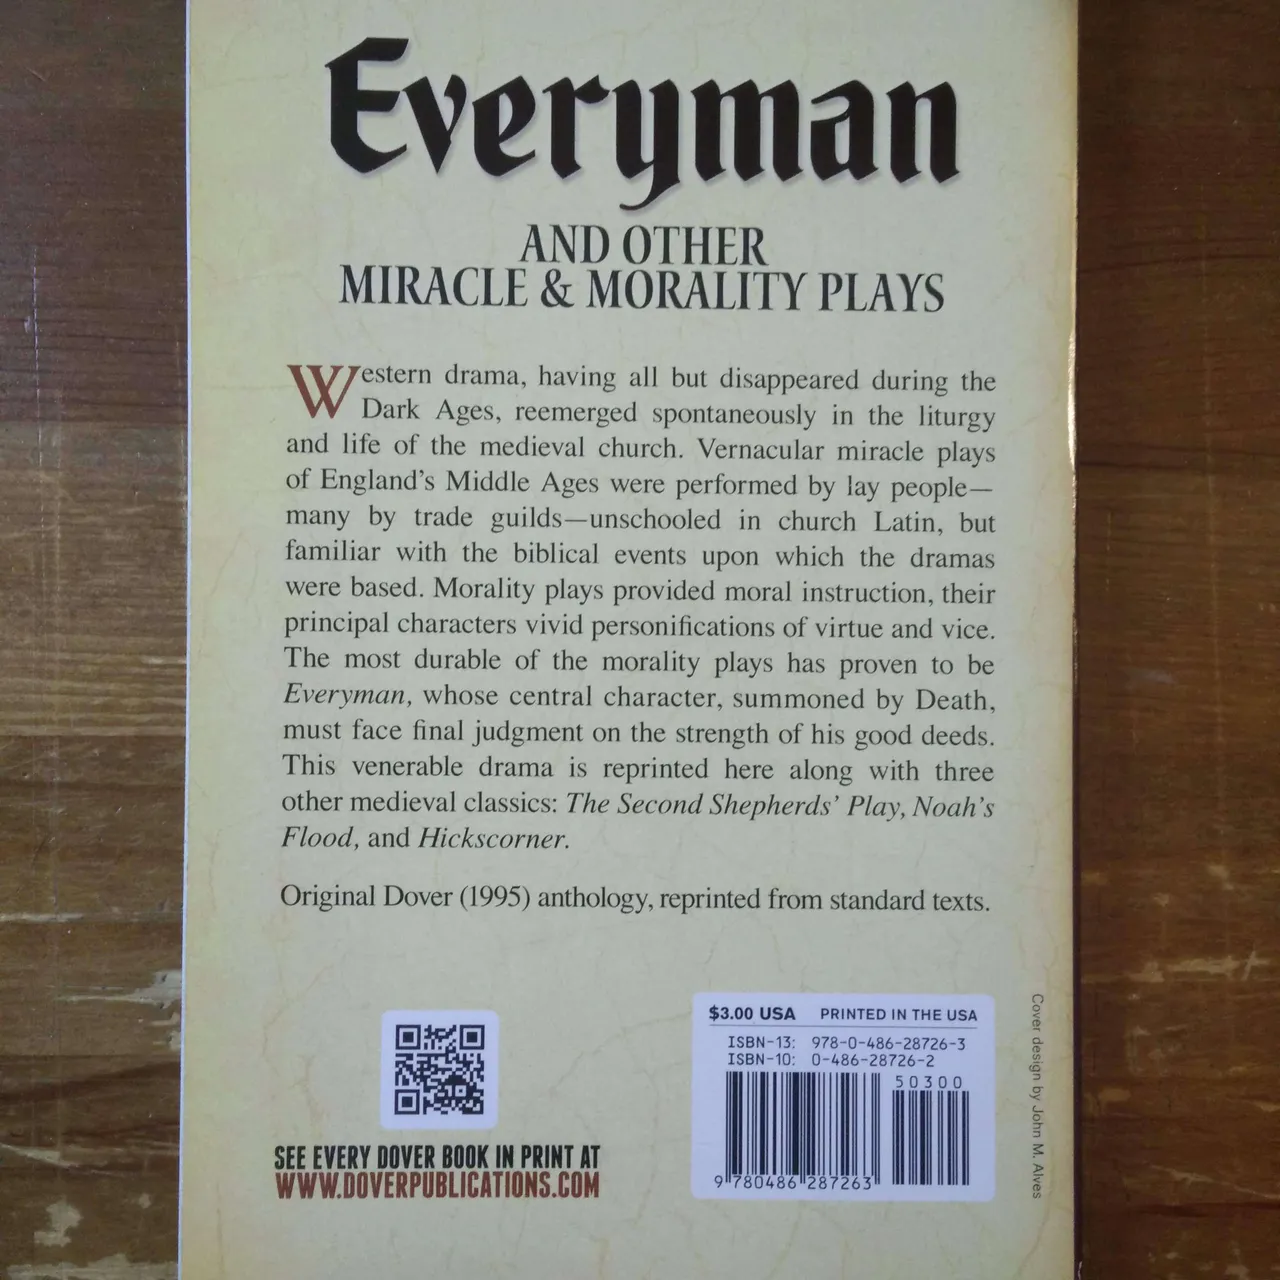 Everyman and Other Miracle & Morality Plays photo 3